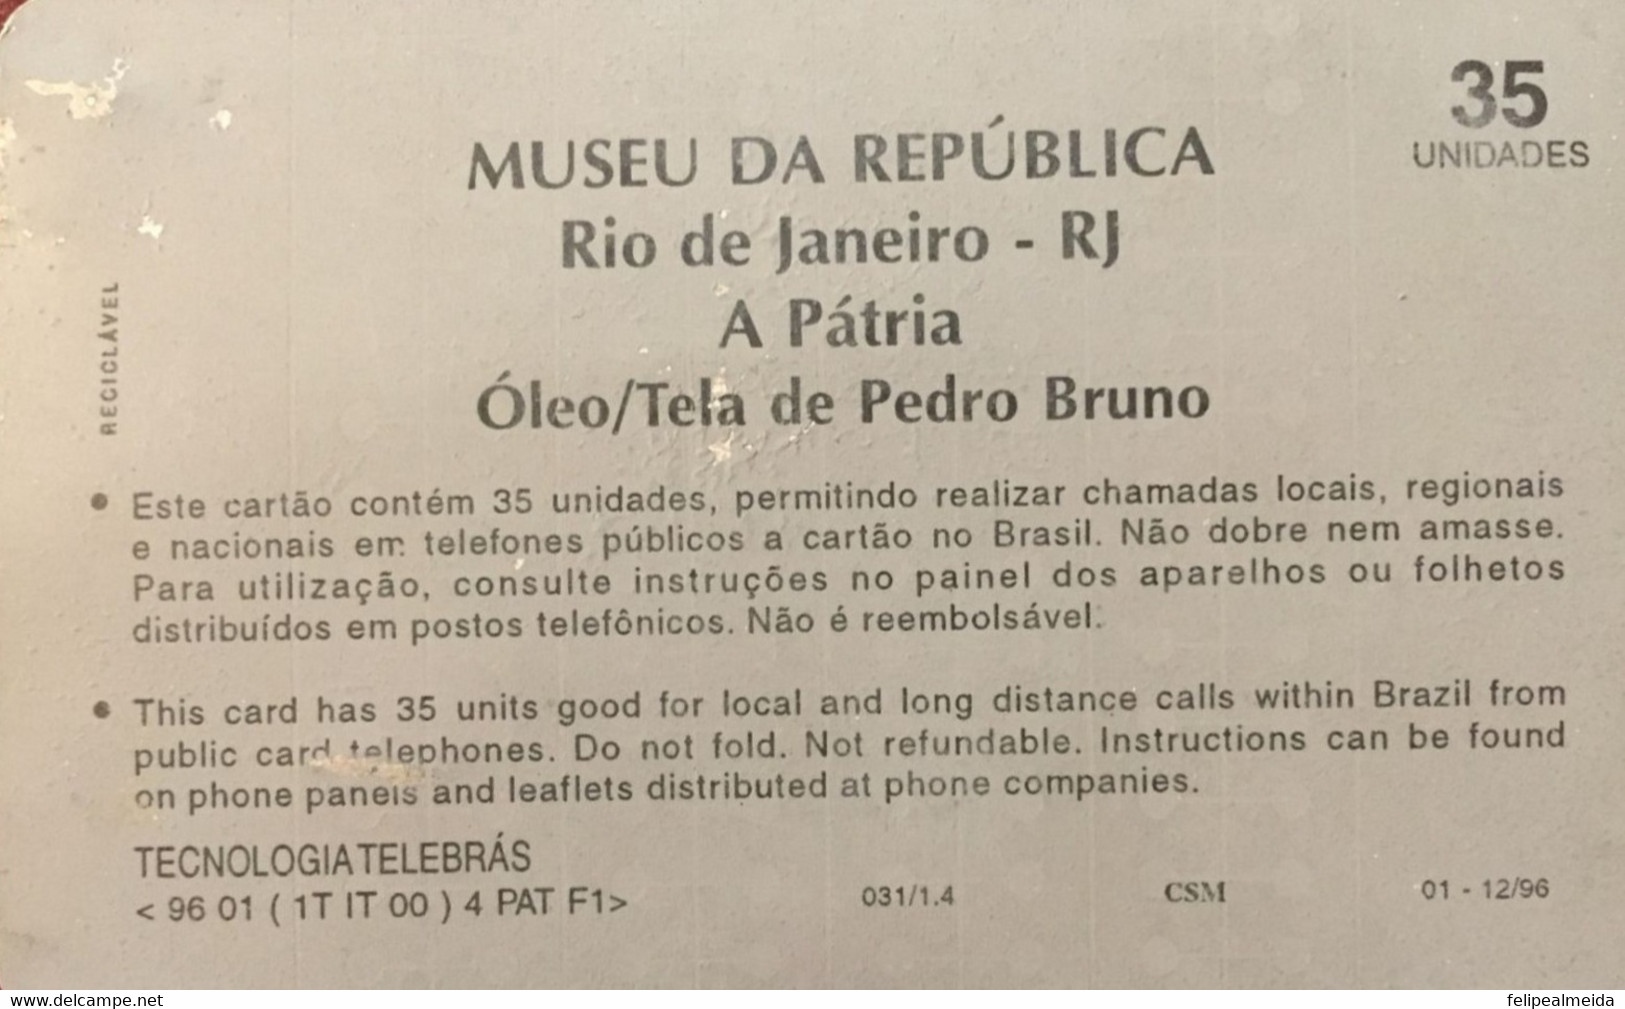 Phone Card Manufactured By Telebras In 1996 - Series Museums - Painting A Pátria - Painter Pedro Bruno - Exhibited At Th - Schilderijen